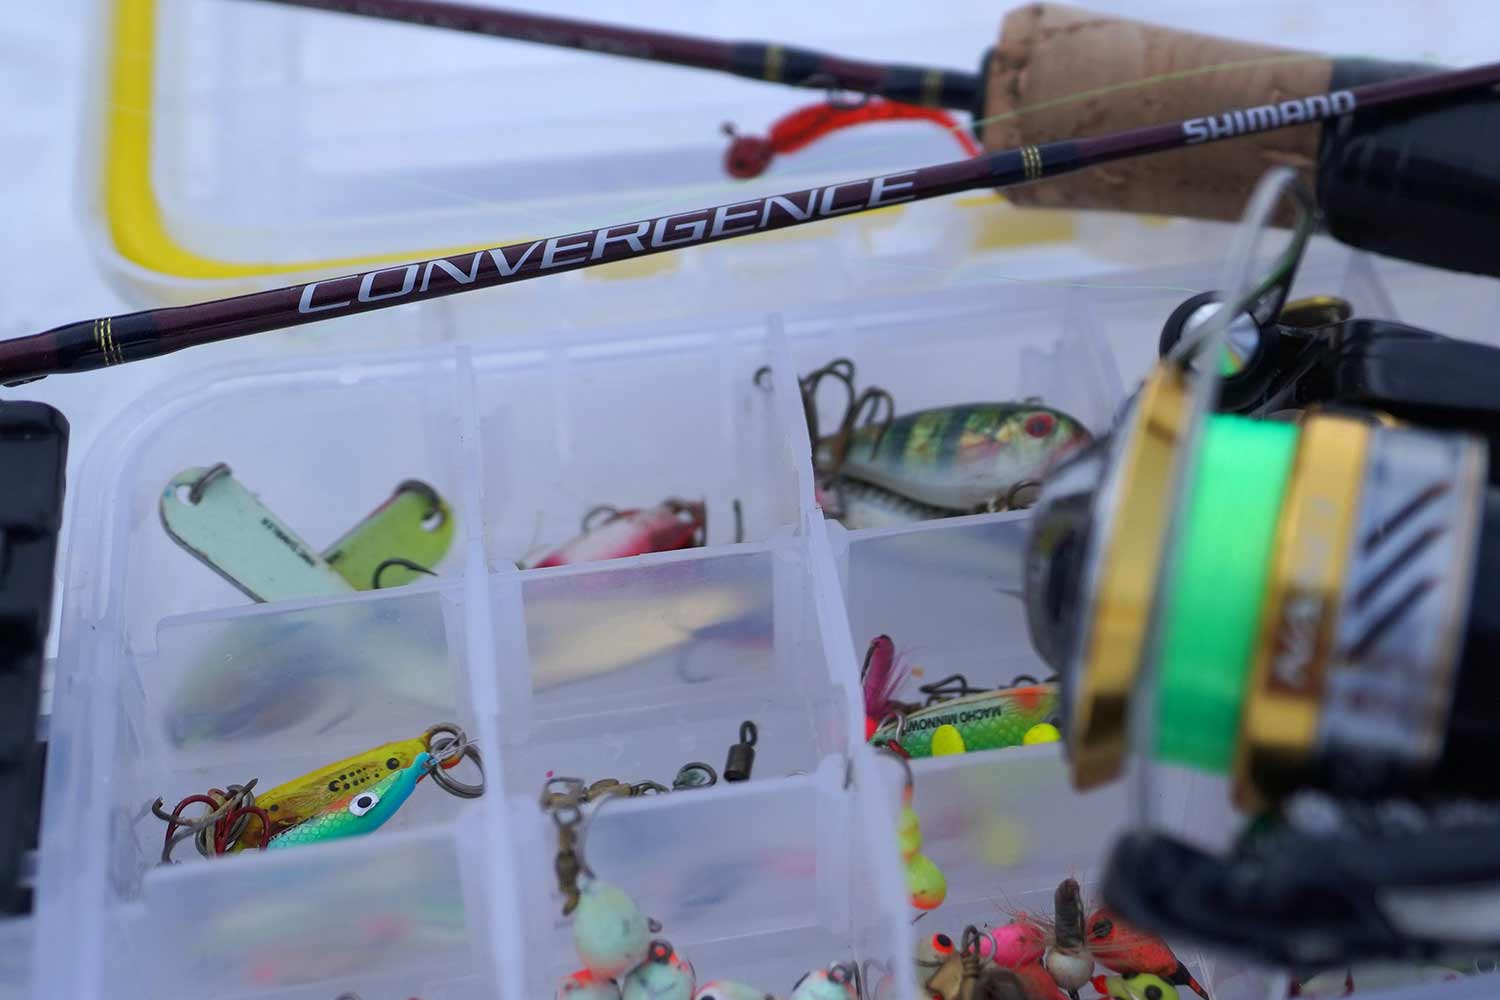 Shallow water panfish lures in a tackle box.